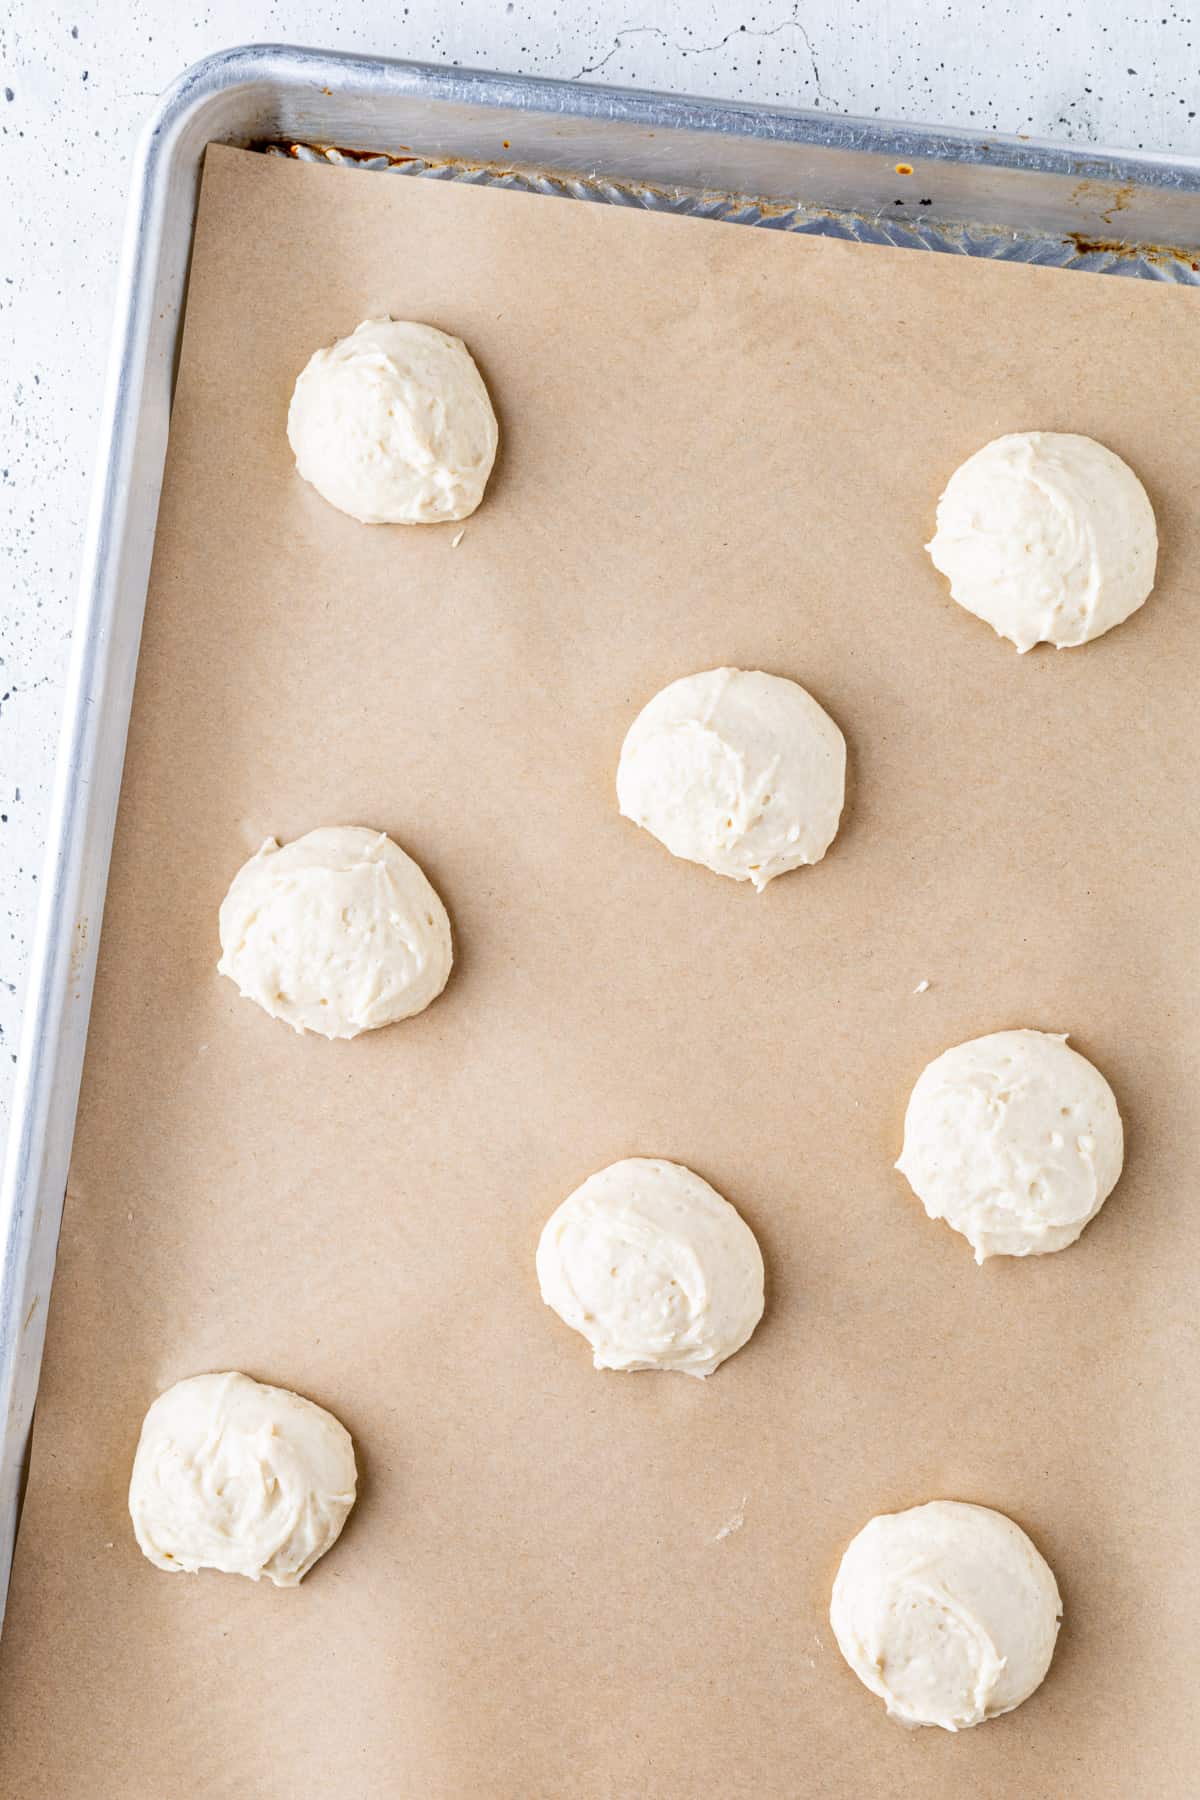 Cookie dough scooped onto a parchment-lined baking sheet.